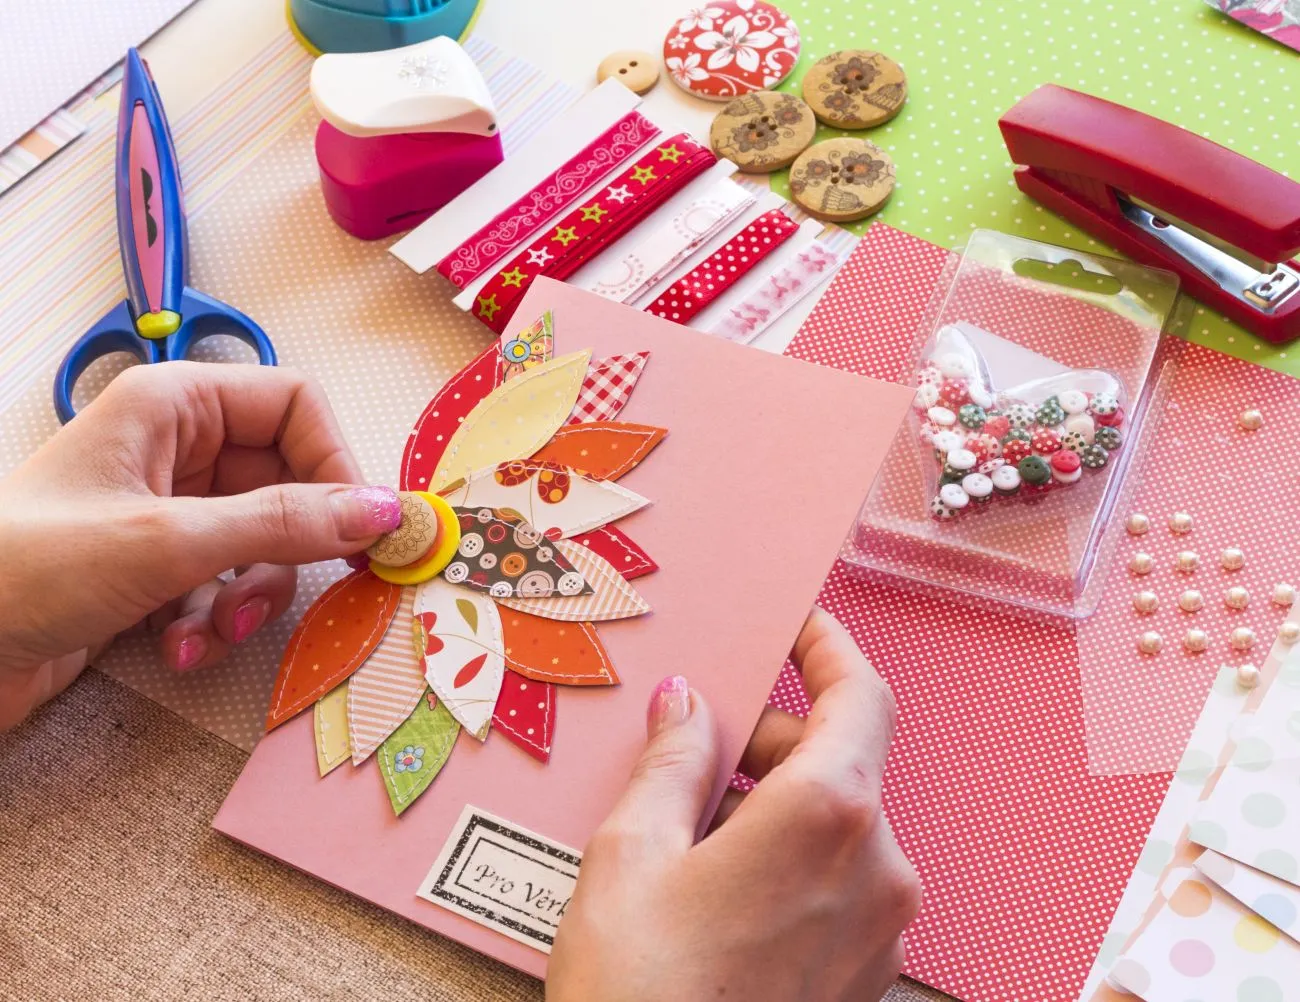 What You Need to Know about Making Your Own Christmas Cards